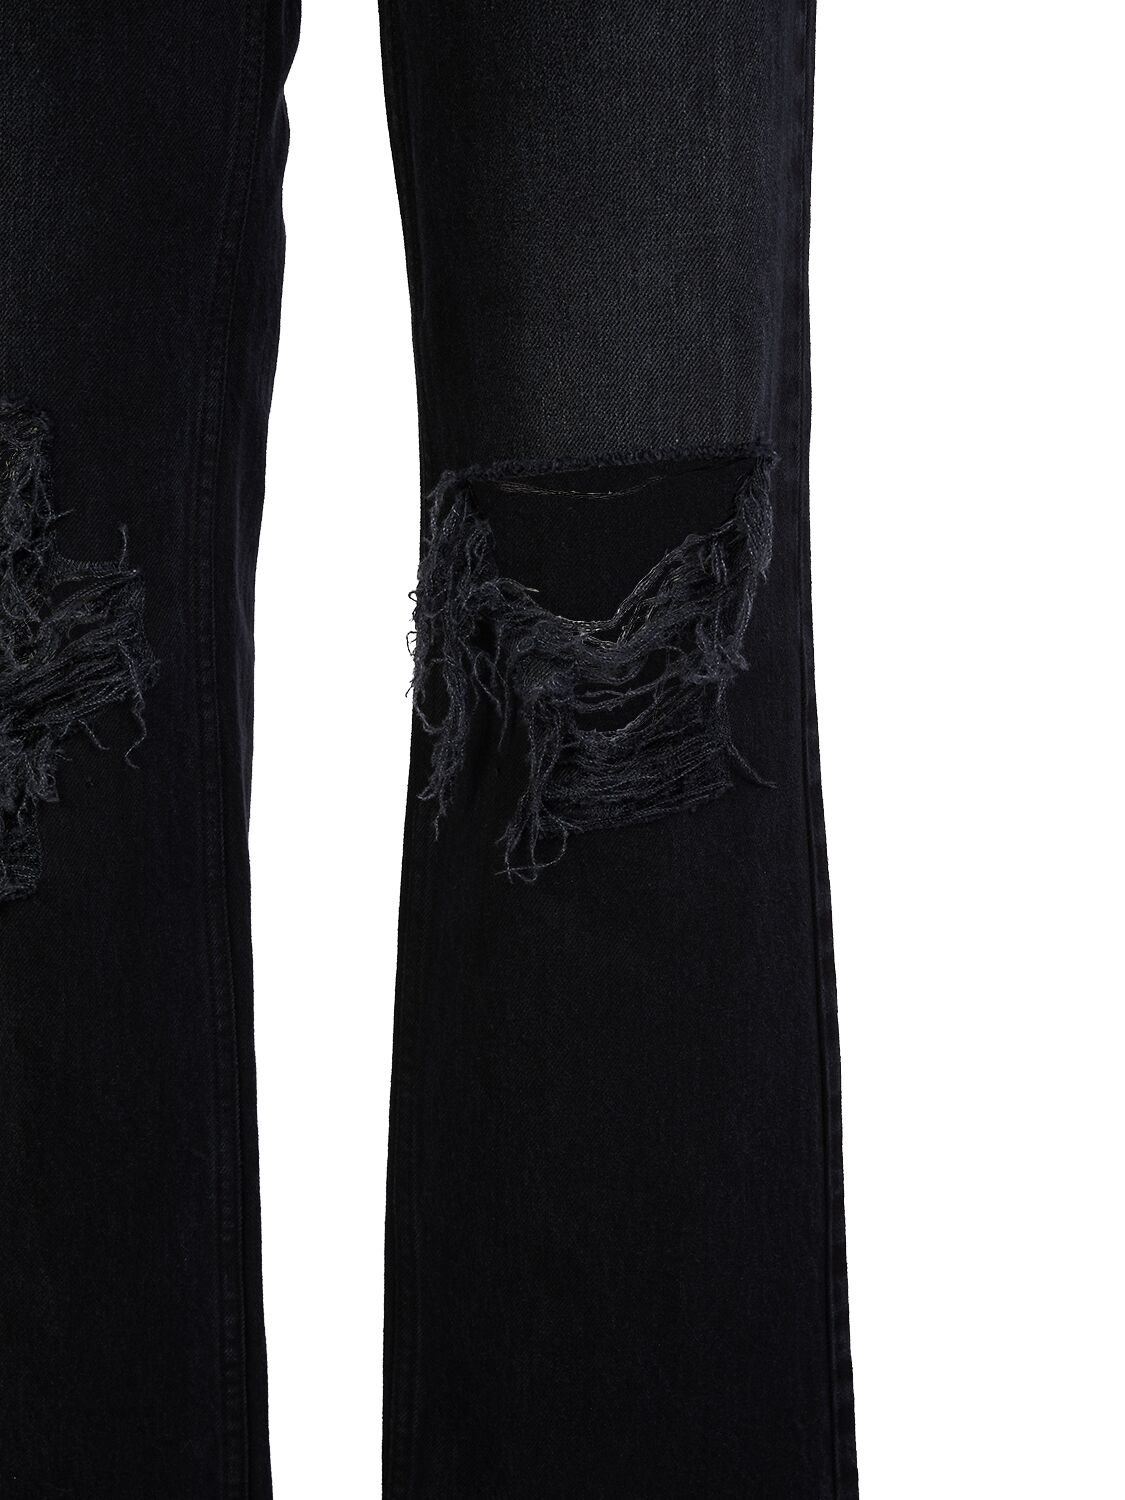 Shop The Row Carel Distressed Midrise Straight Jeans In Black